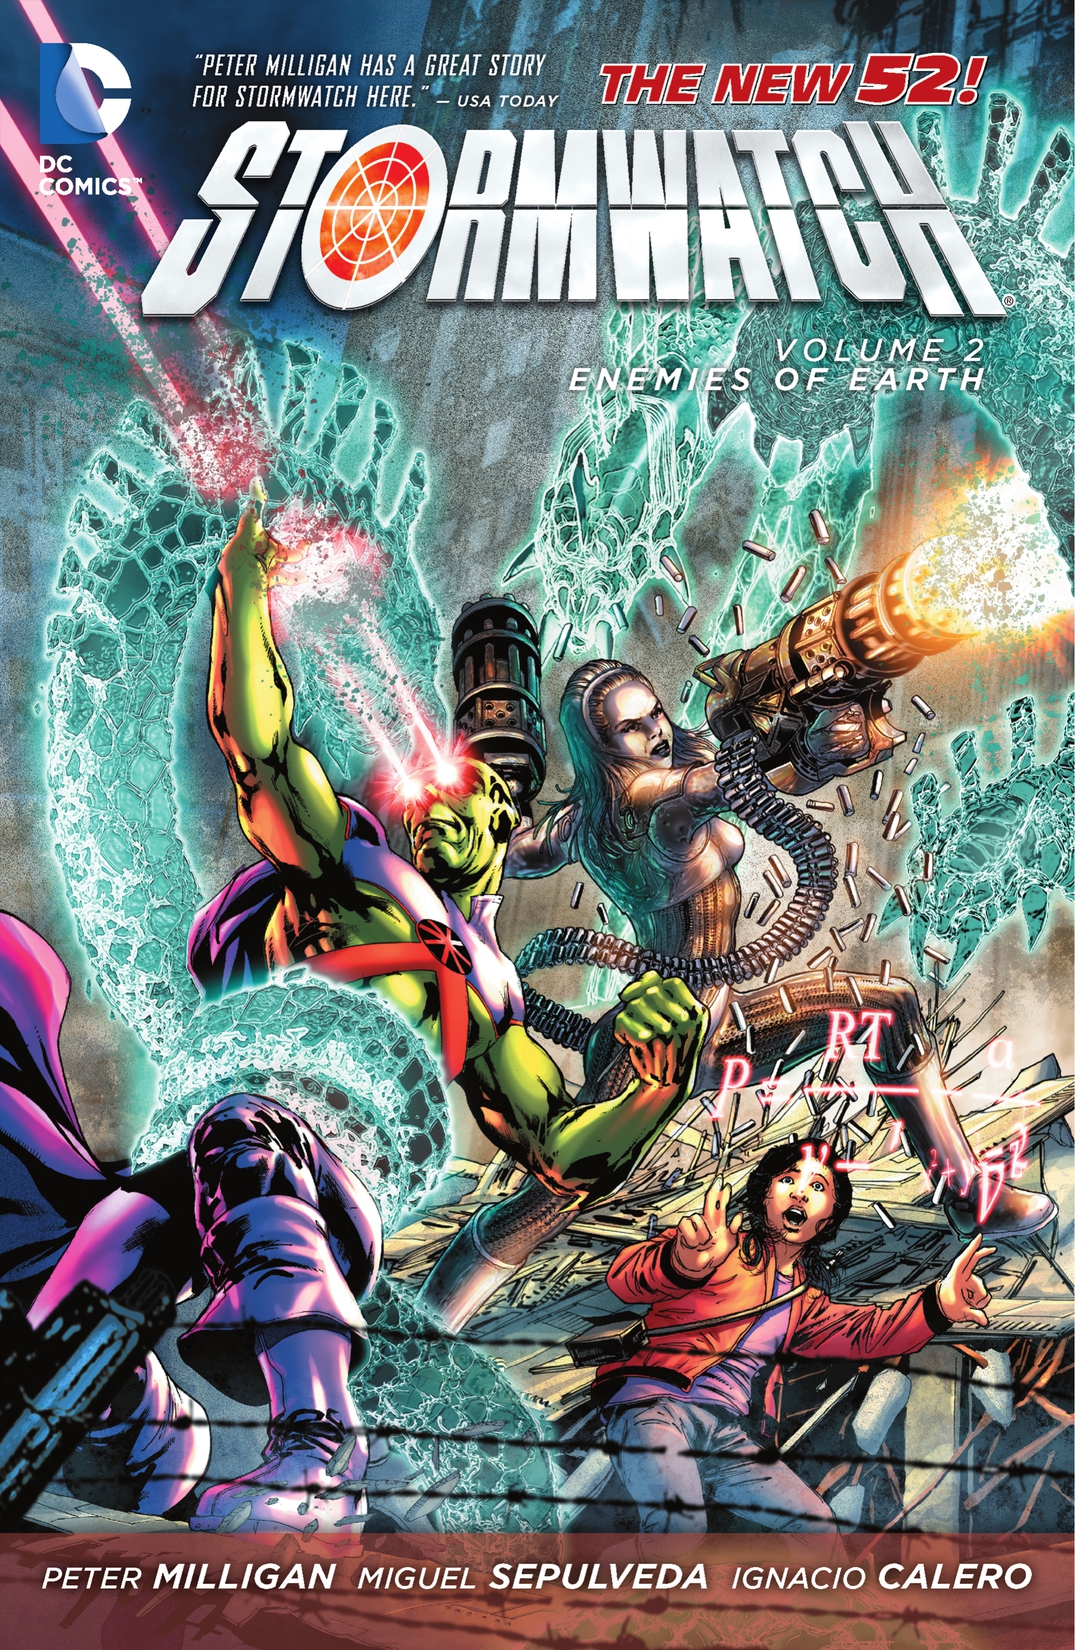 Stormwatch Vol. 2: Enemies of Earth preview images